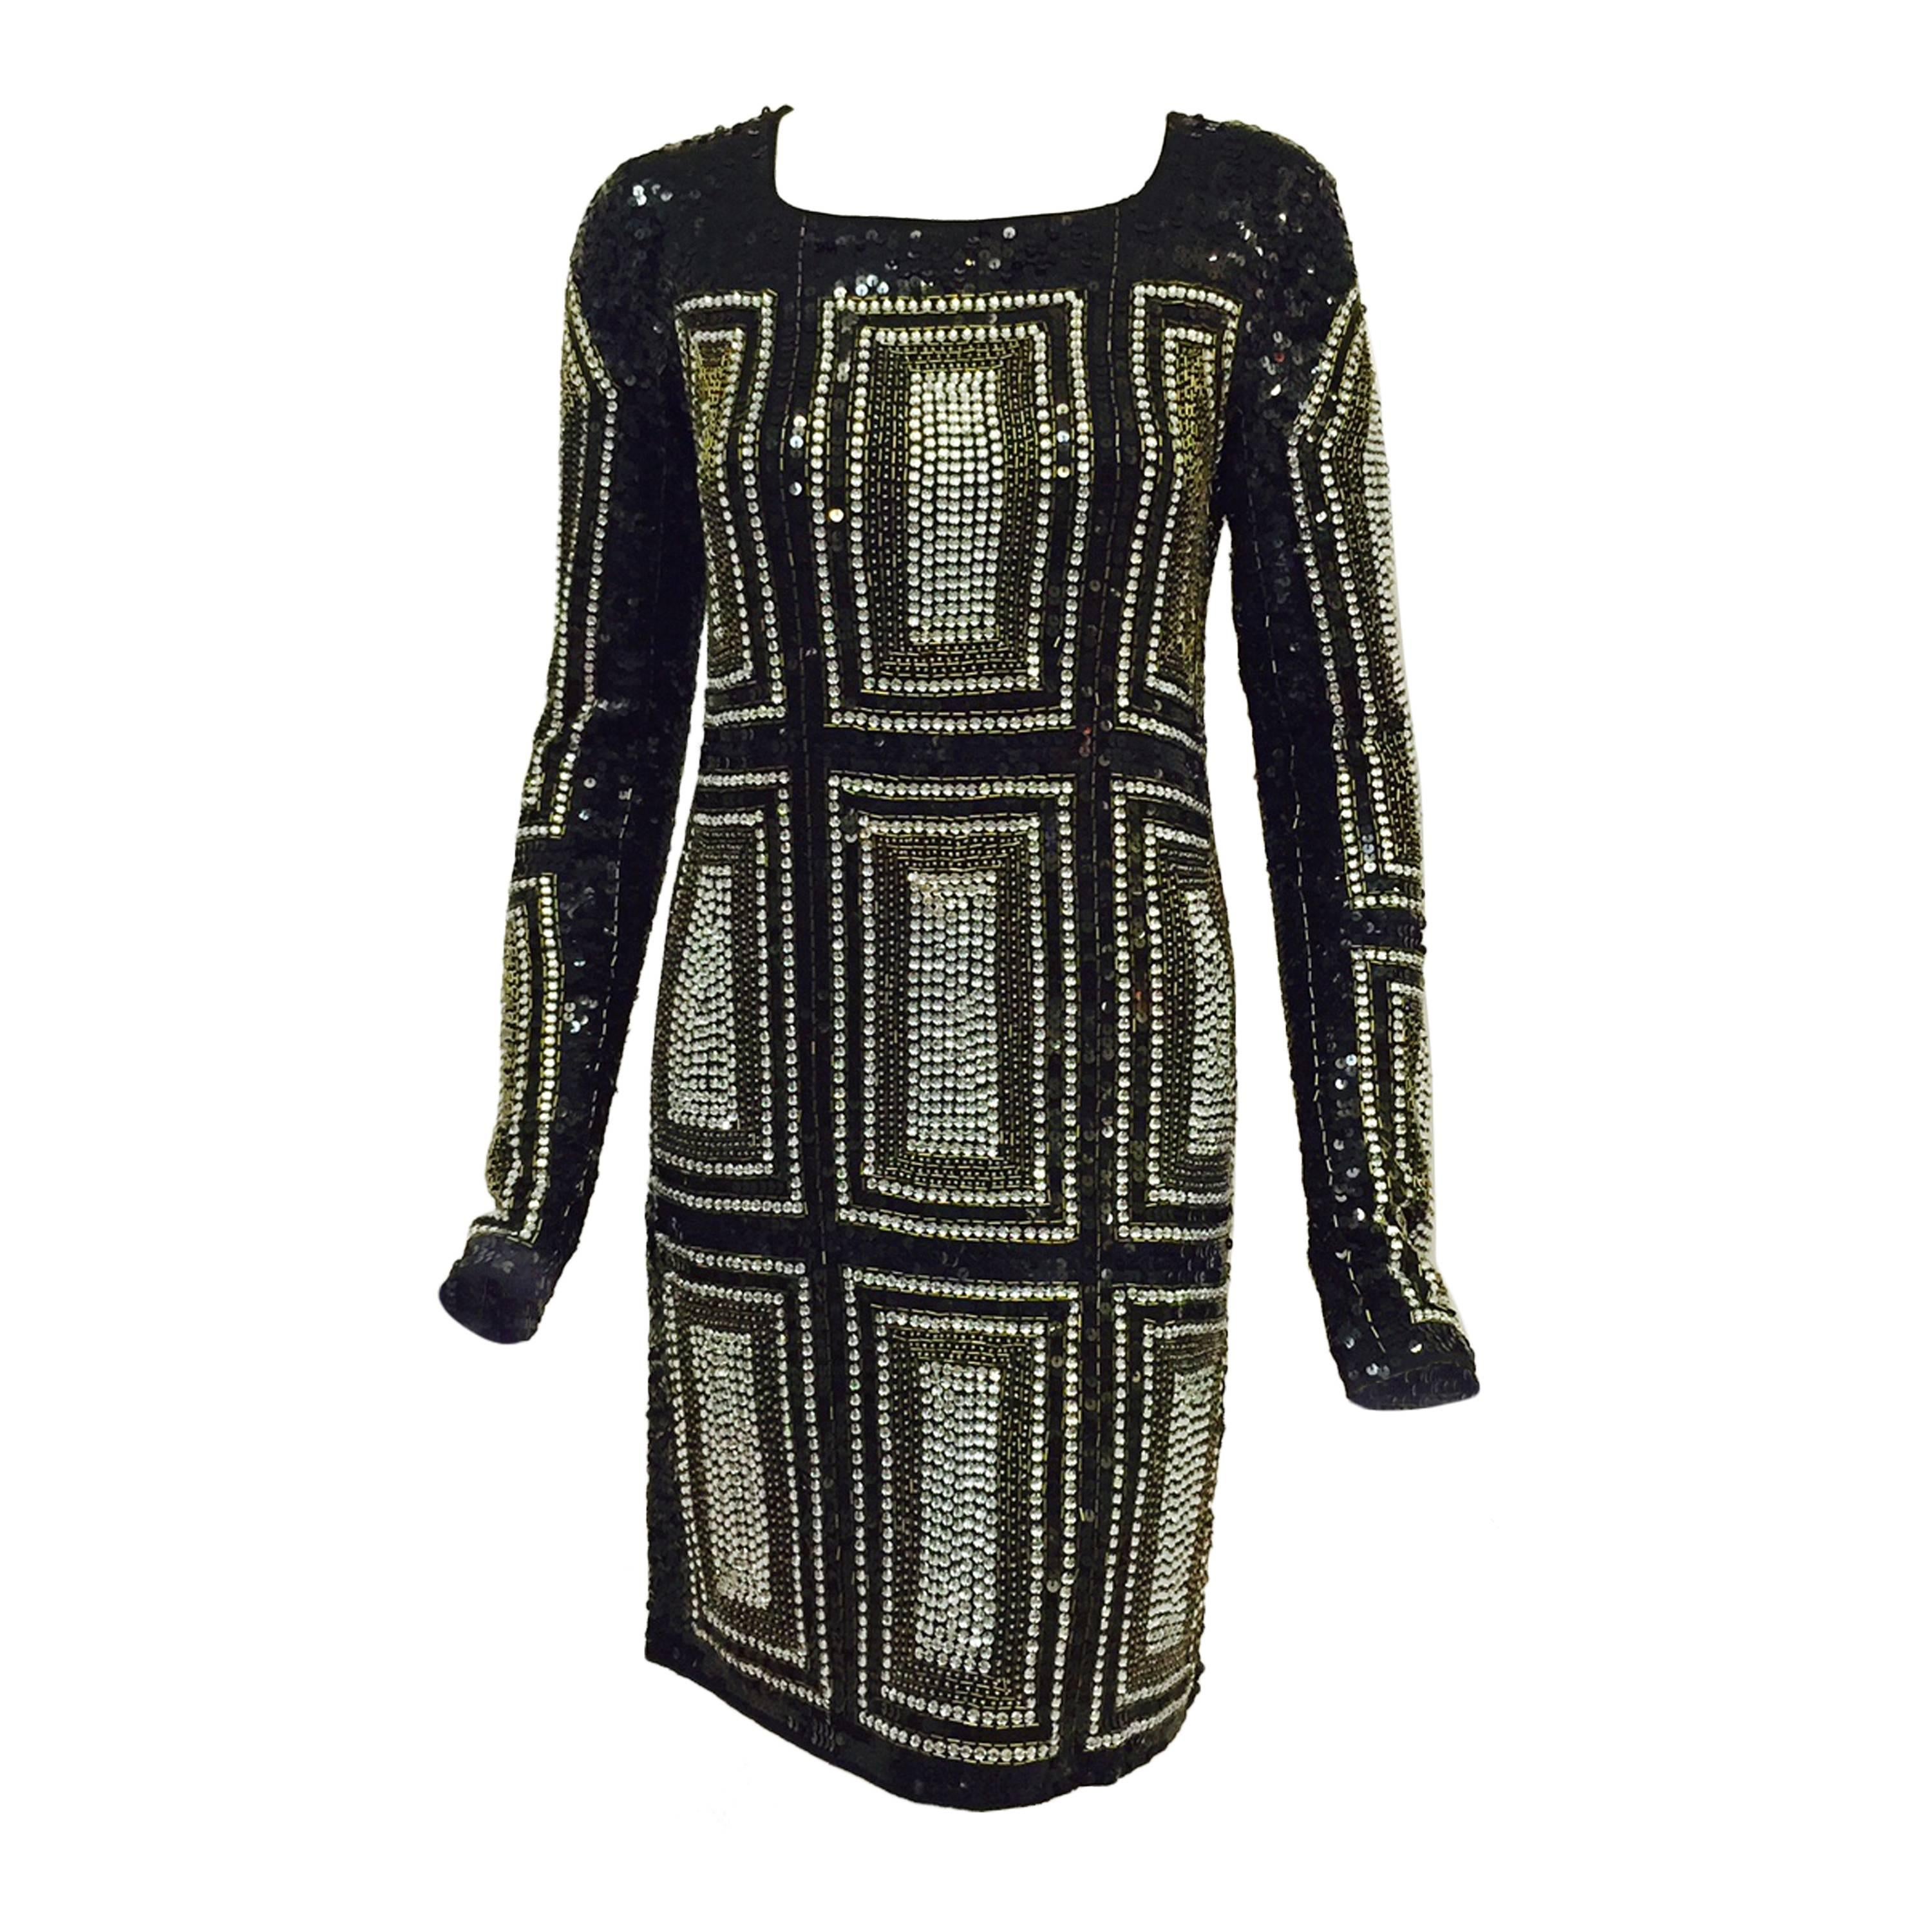 New All Love Black Long Sleeve Dress Encrusted with Beads and Sequins 